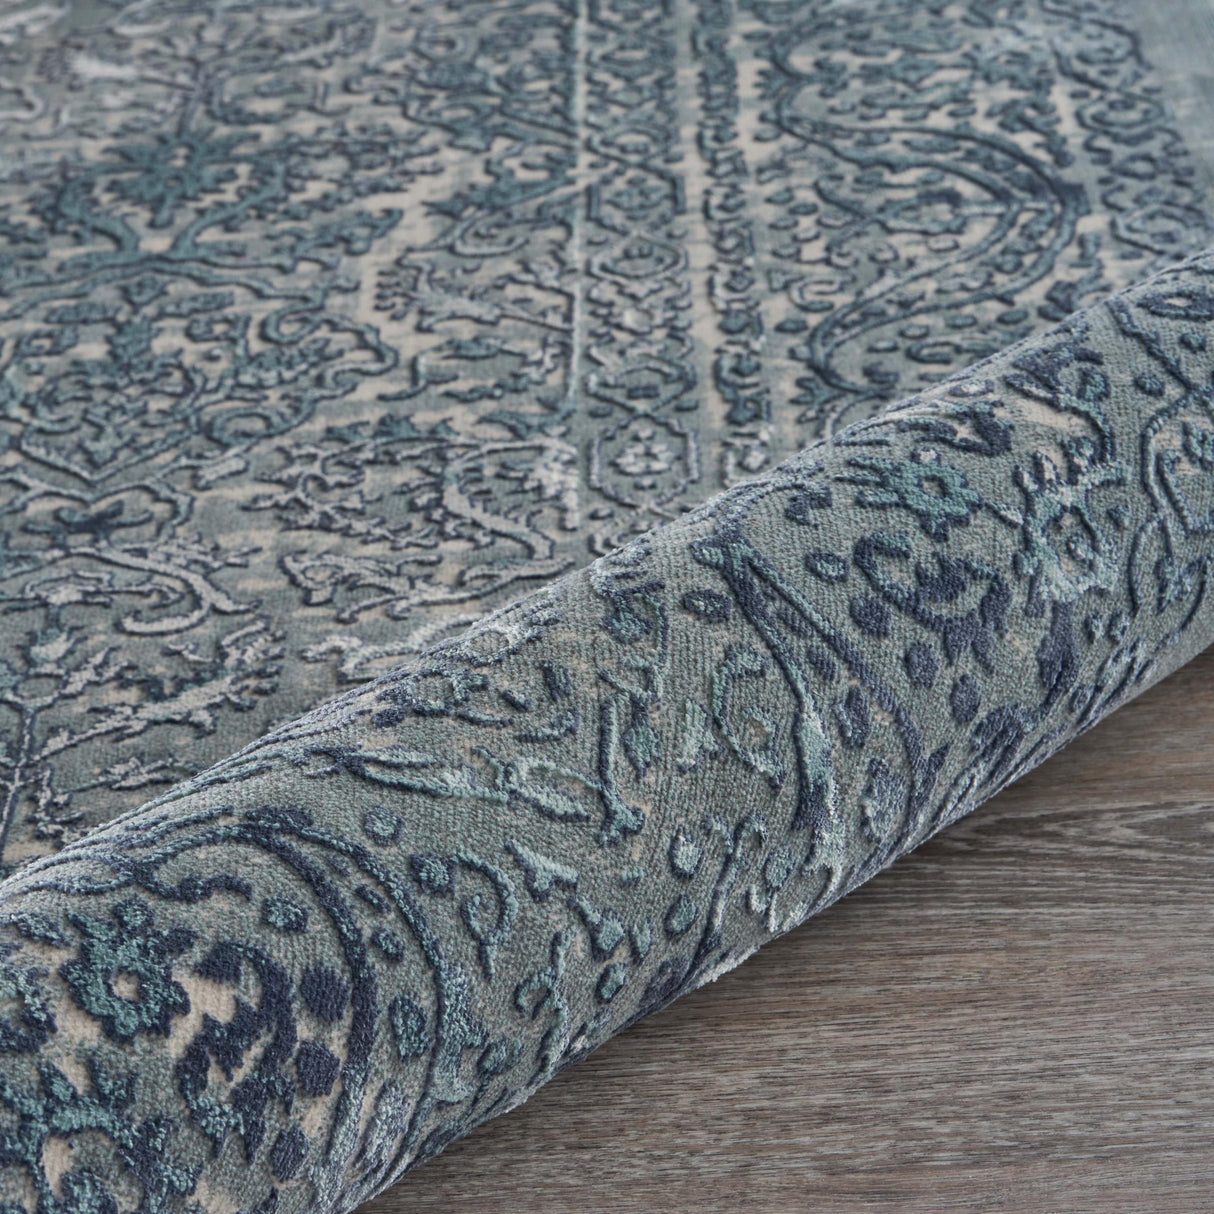 10' X 13' Blue Silver Gray And Cream Damask Distressed Stain Resistant Area Rug